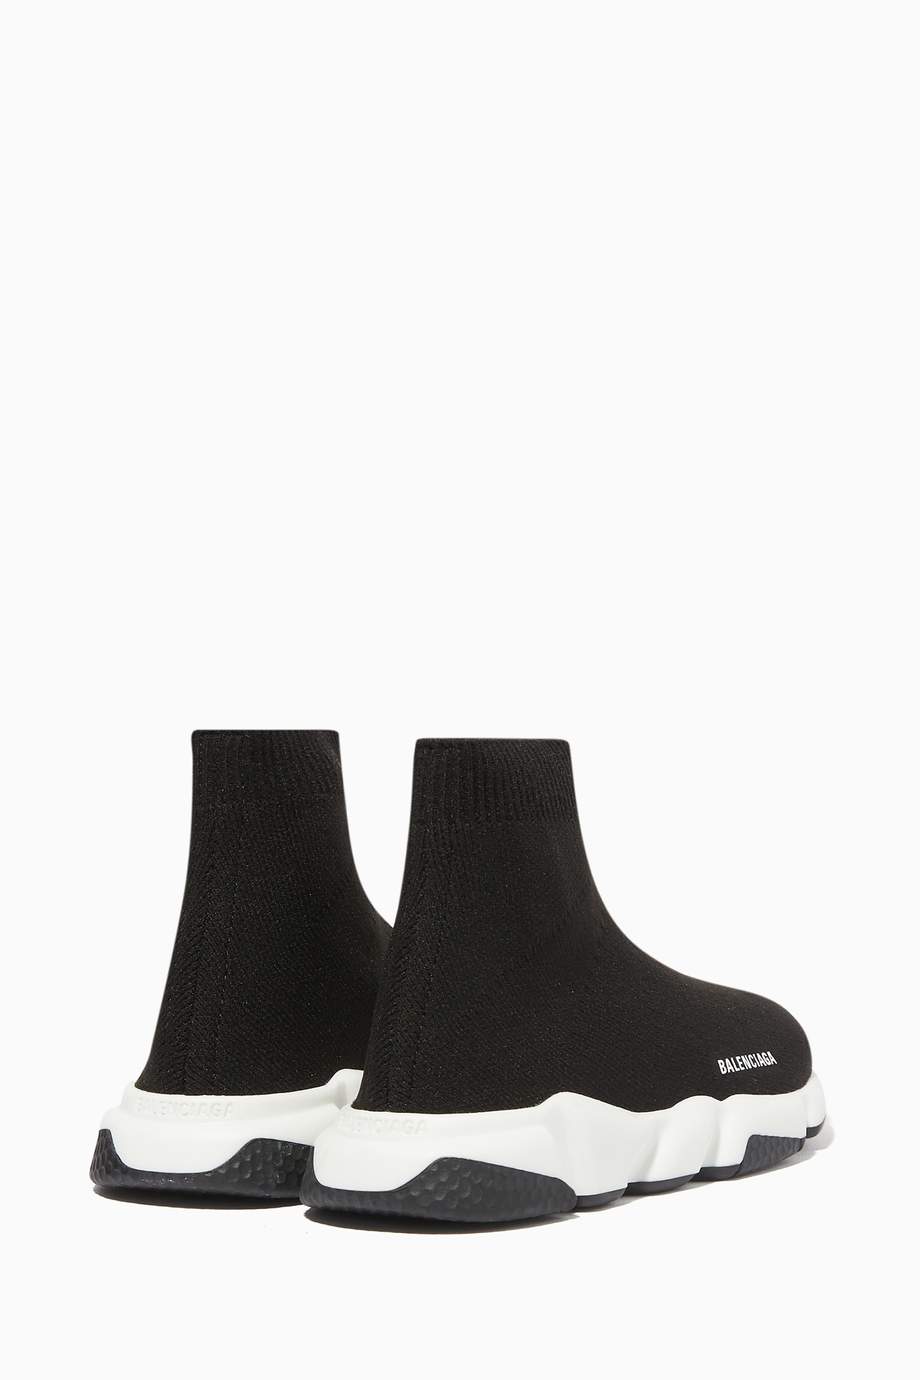 Shop Balenciaga Black Speed Knit Pull-On Sneakers for Kids | Ounass UAE